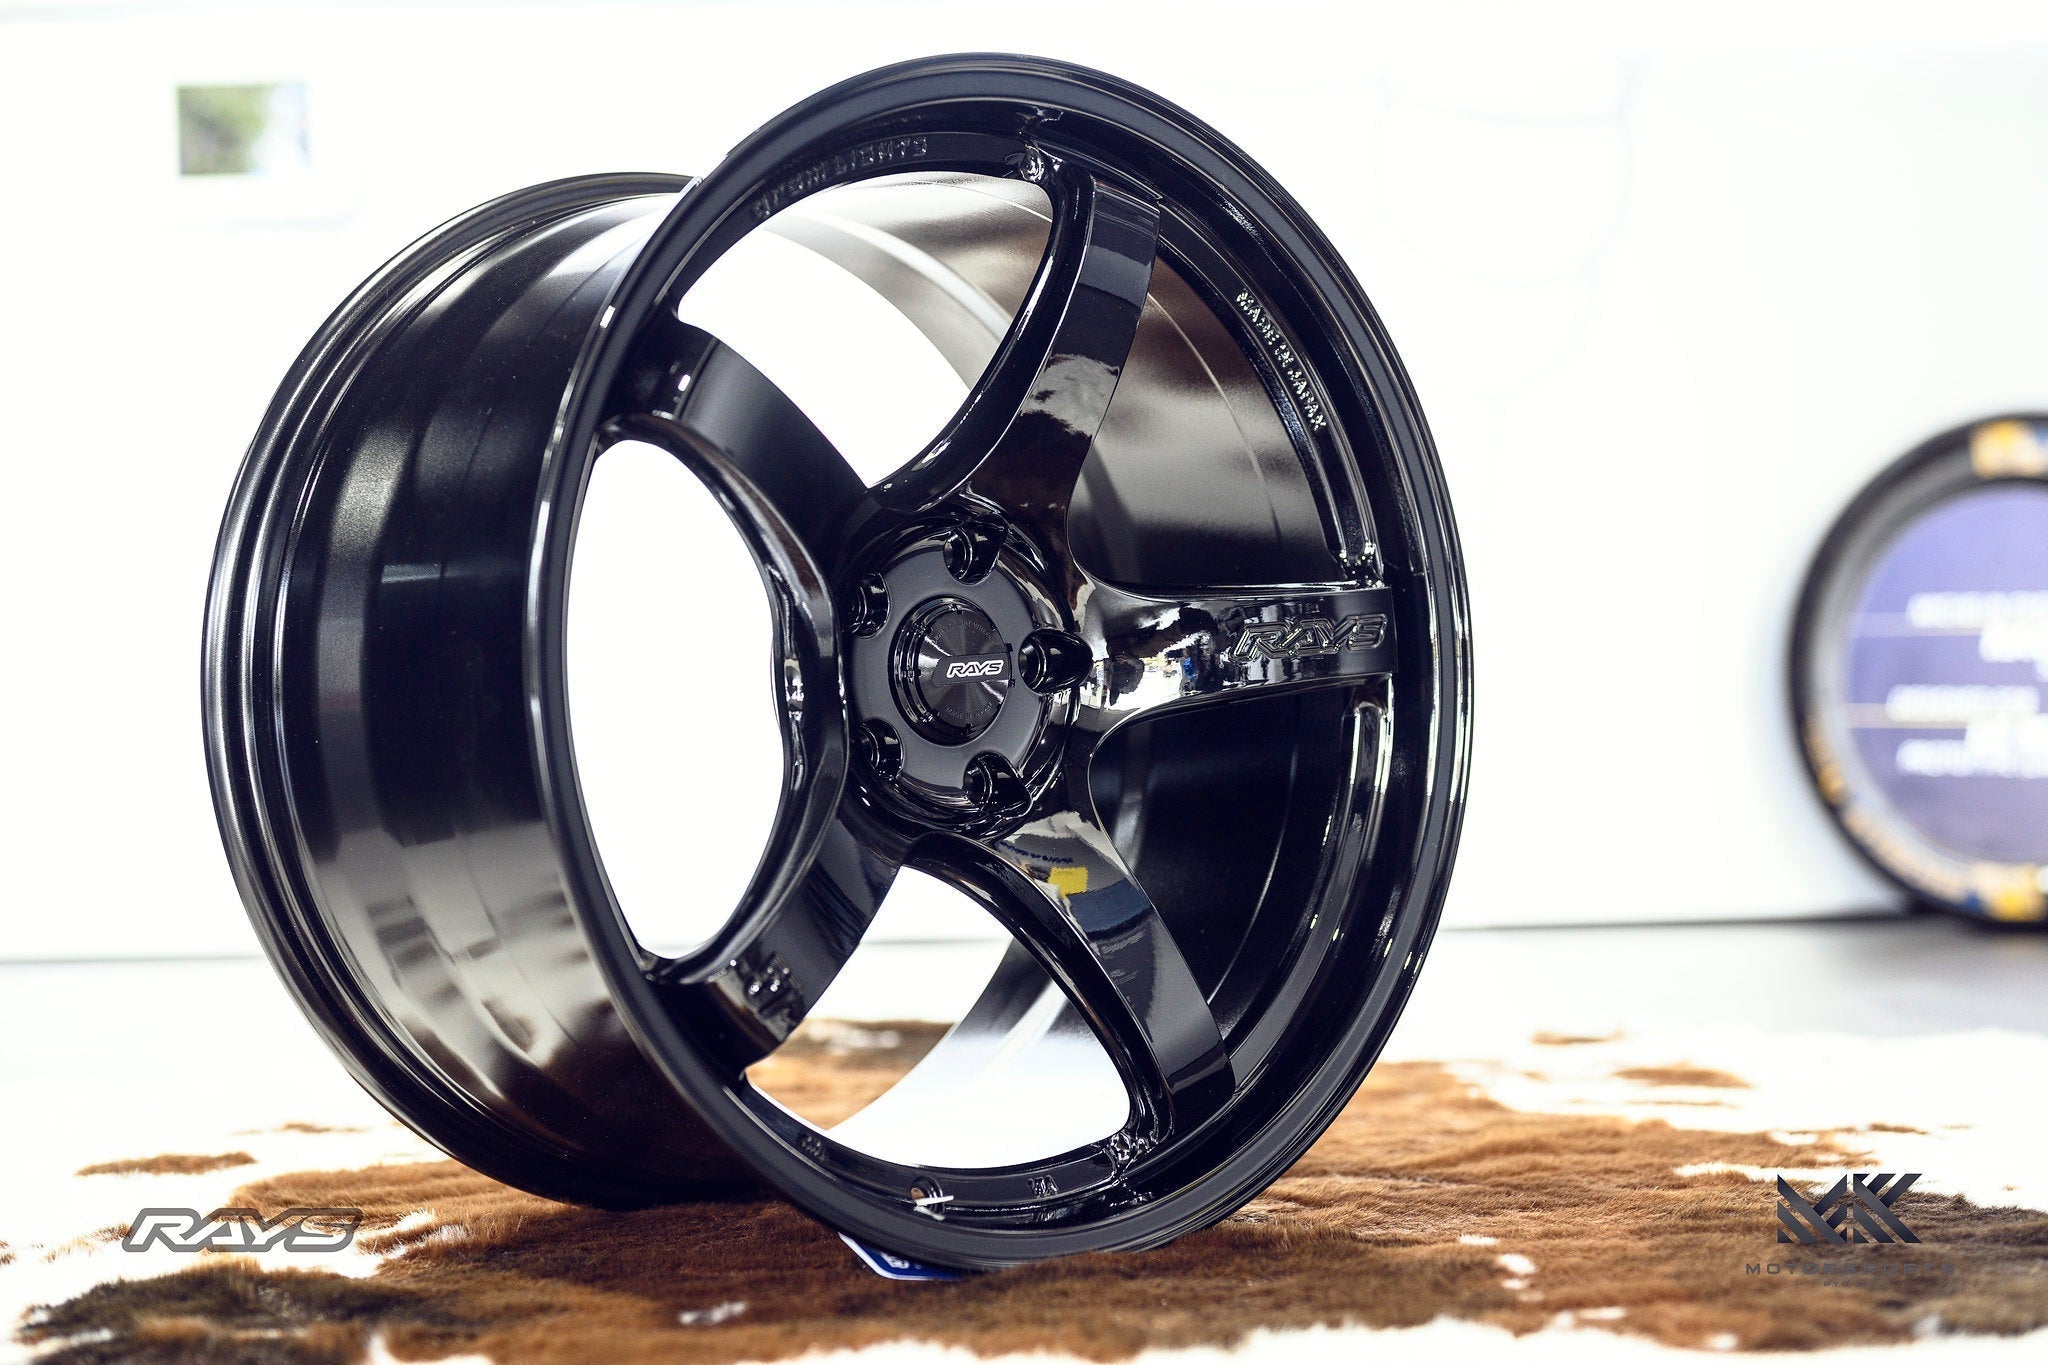 gramLIGHTS 57CR 15" - Premium Wheels from Gram Lights - From just $1790.0! Shop now at MK MOTORSPORTS